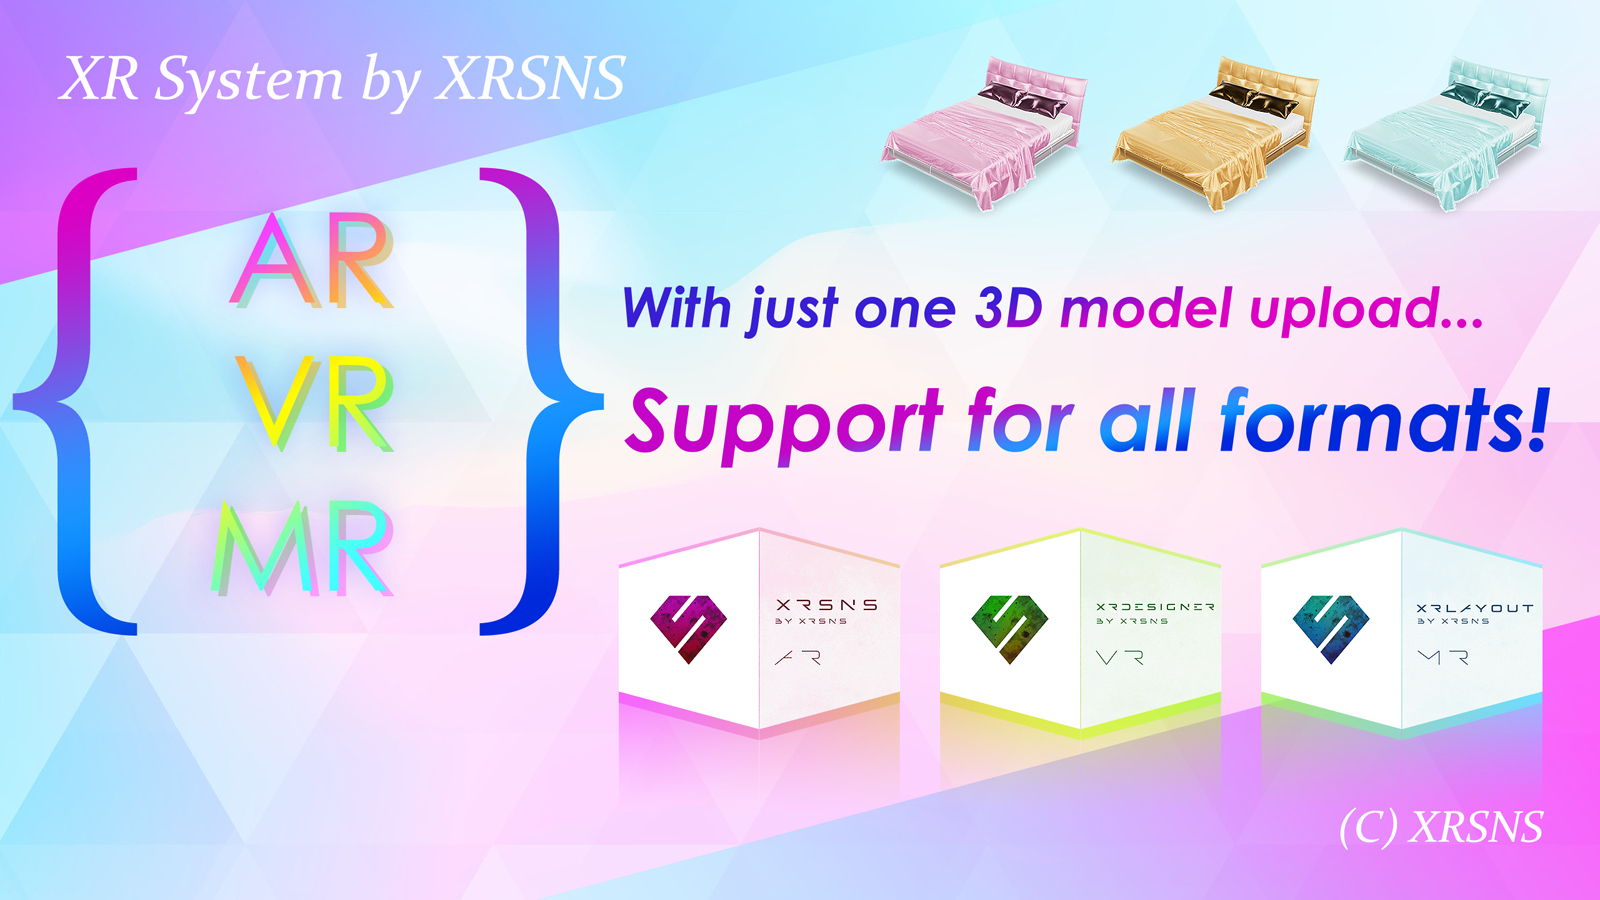 Support for all formats with just one 3D model upload.